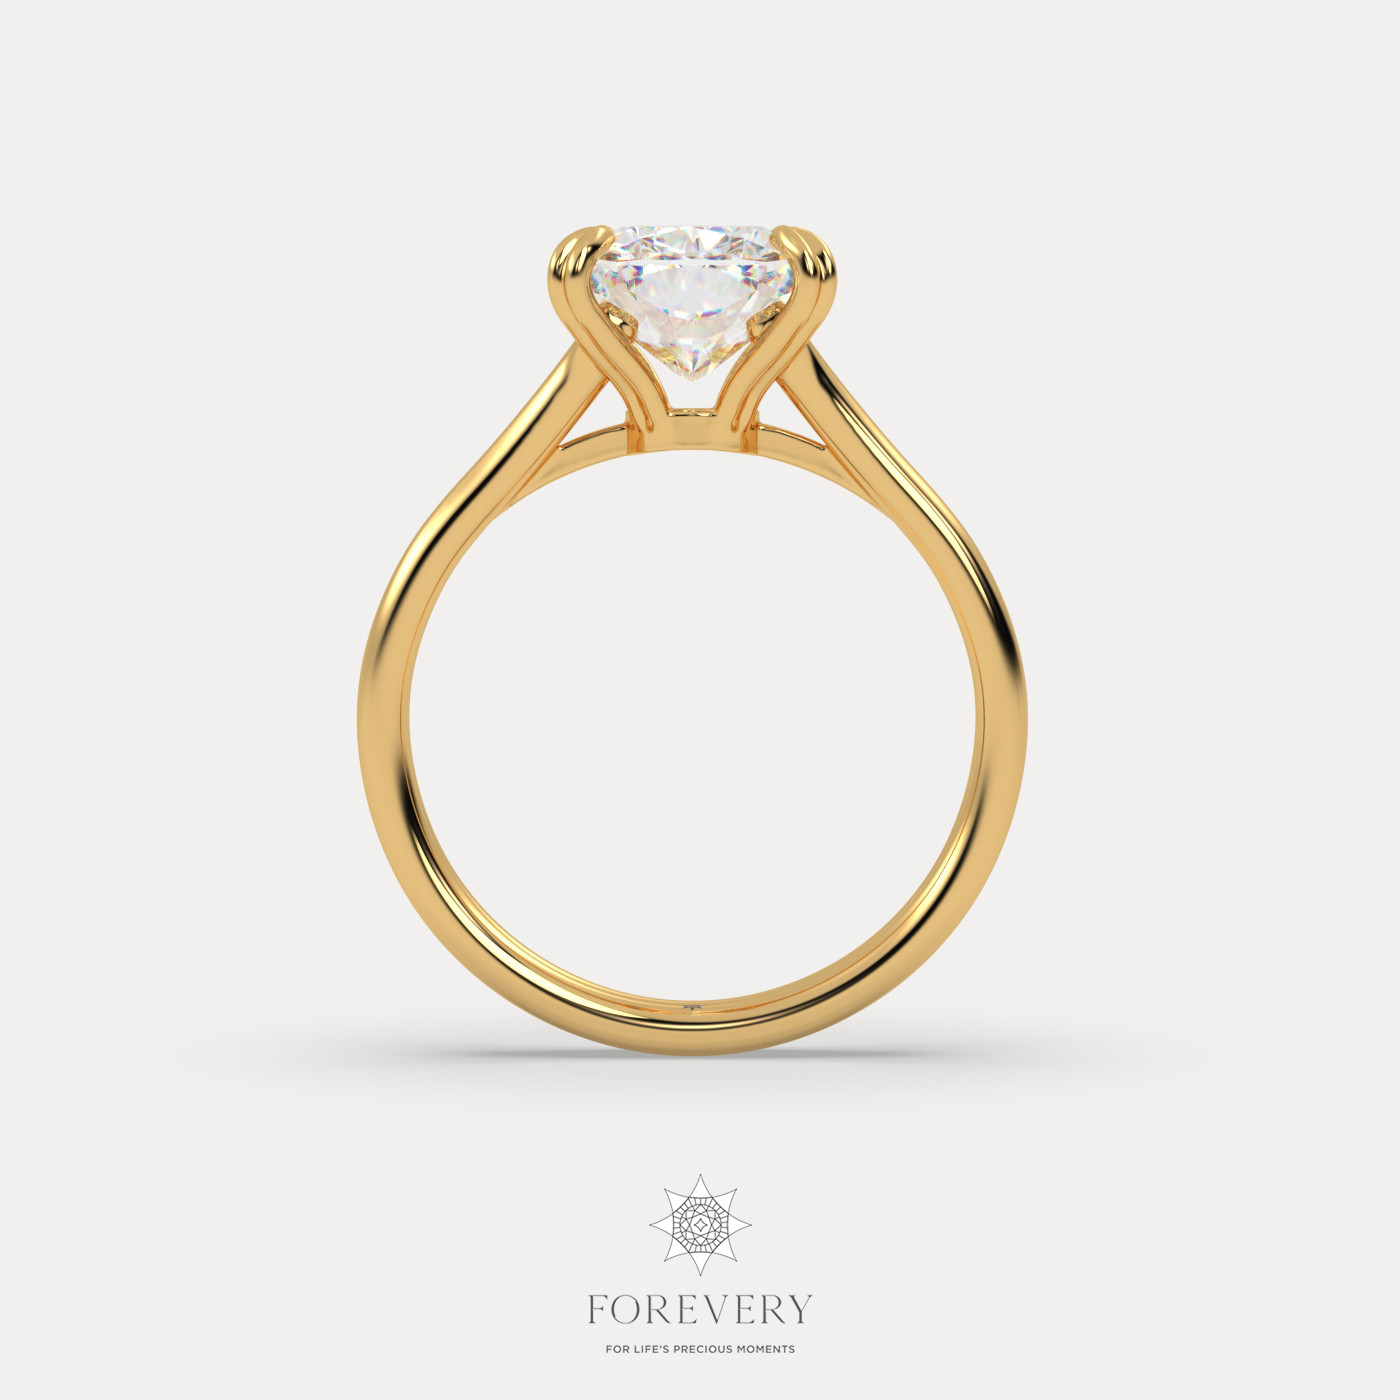 18K YELLOW GOLD Cushion Cut Diamond Solitaire Engagament Ring